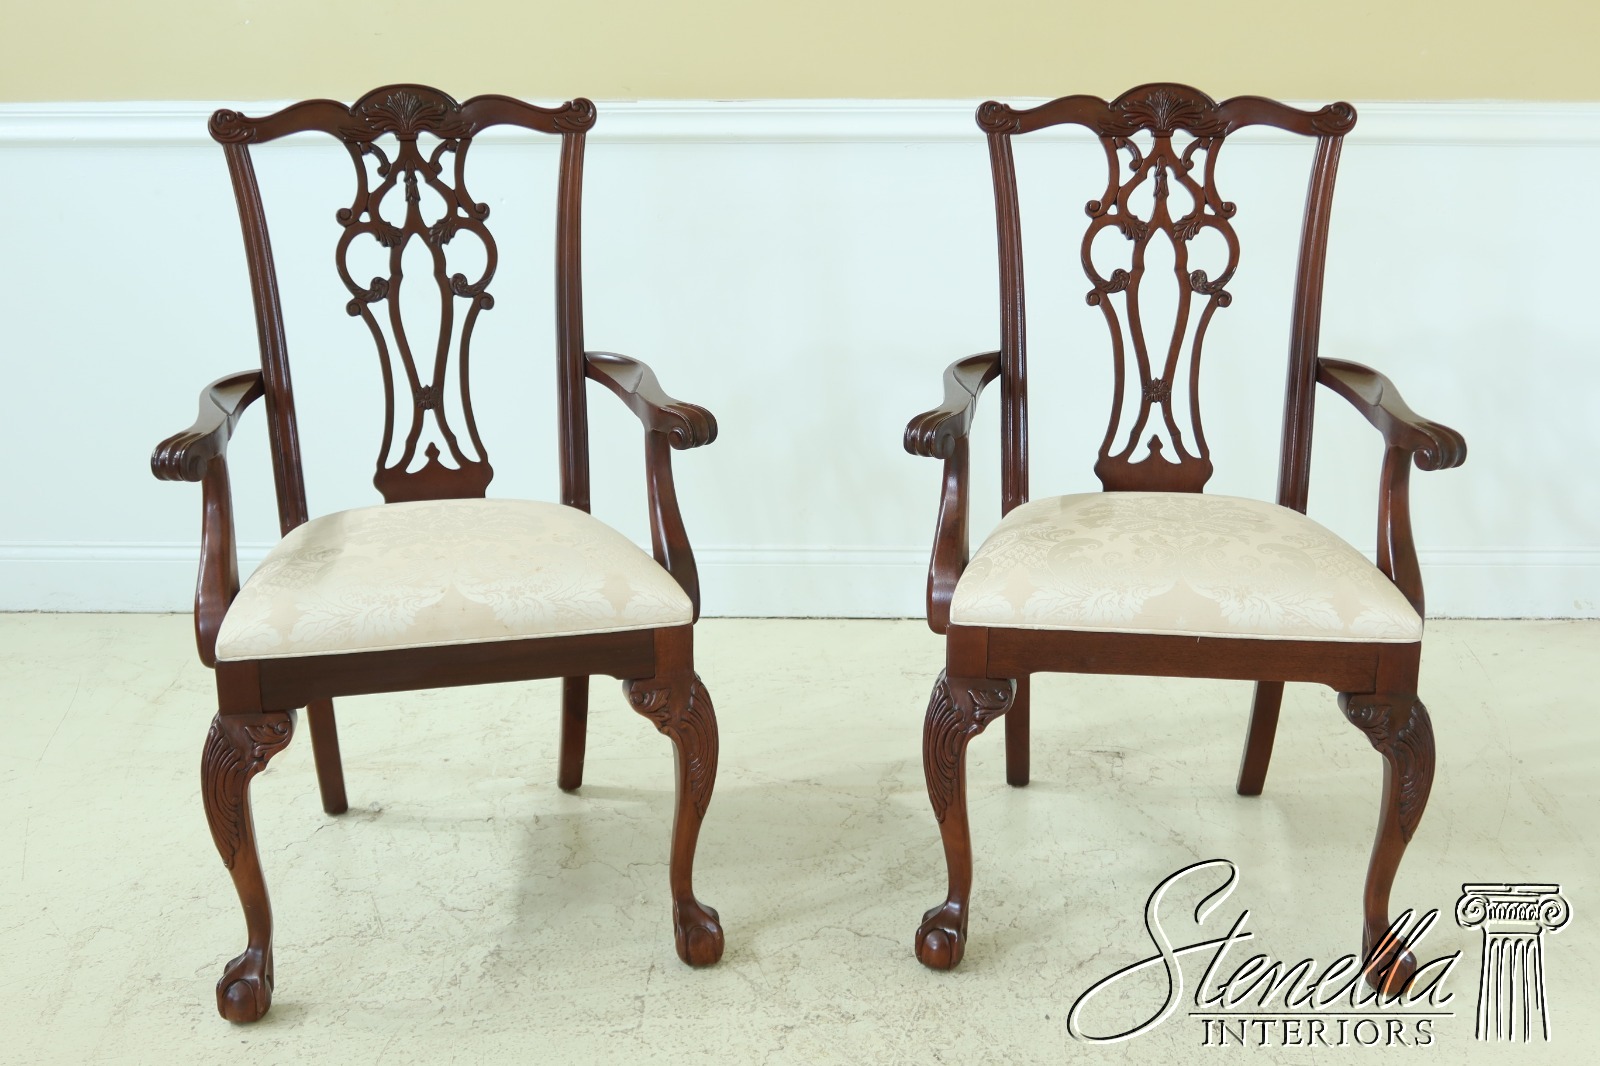 L31988EC: Set Of 6 ETHAN ALLEN Ball & Claw Mahogany Dining Room Chairs